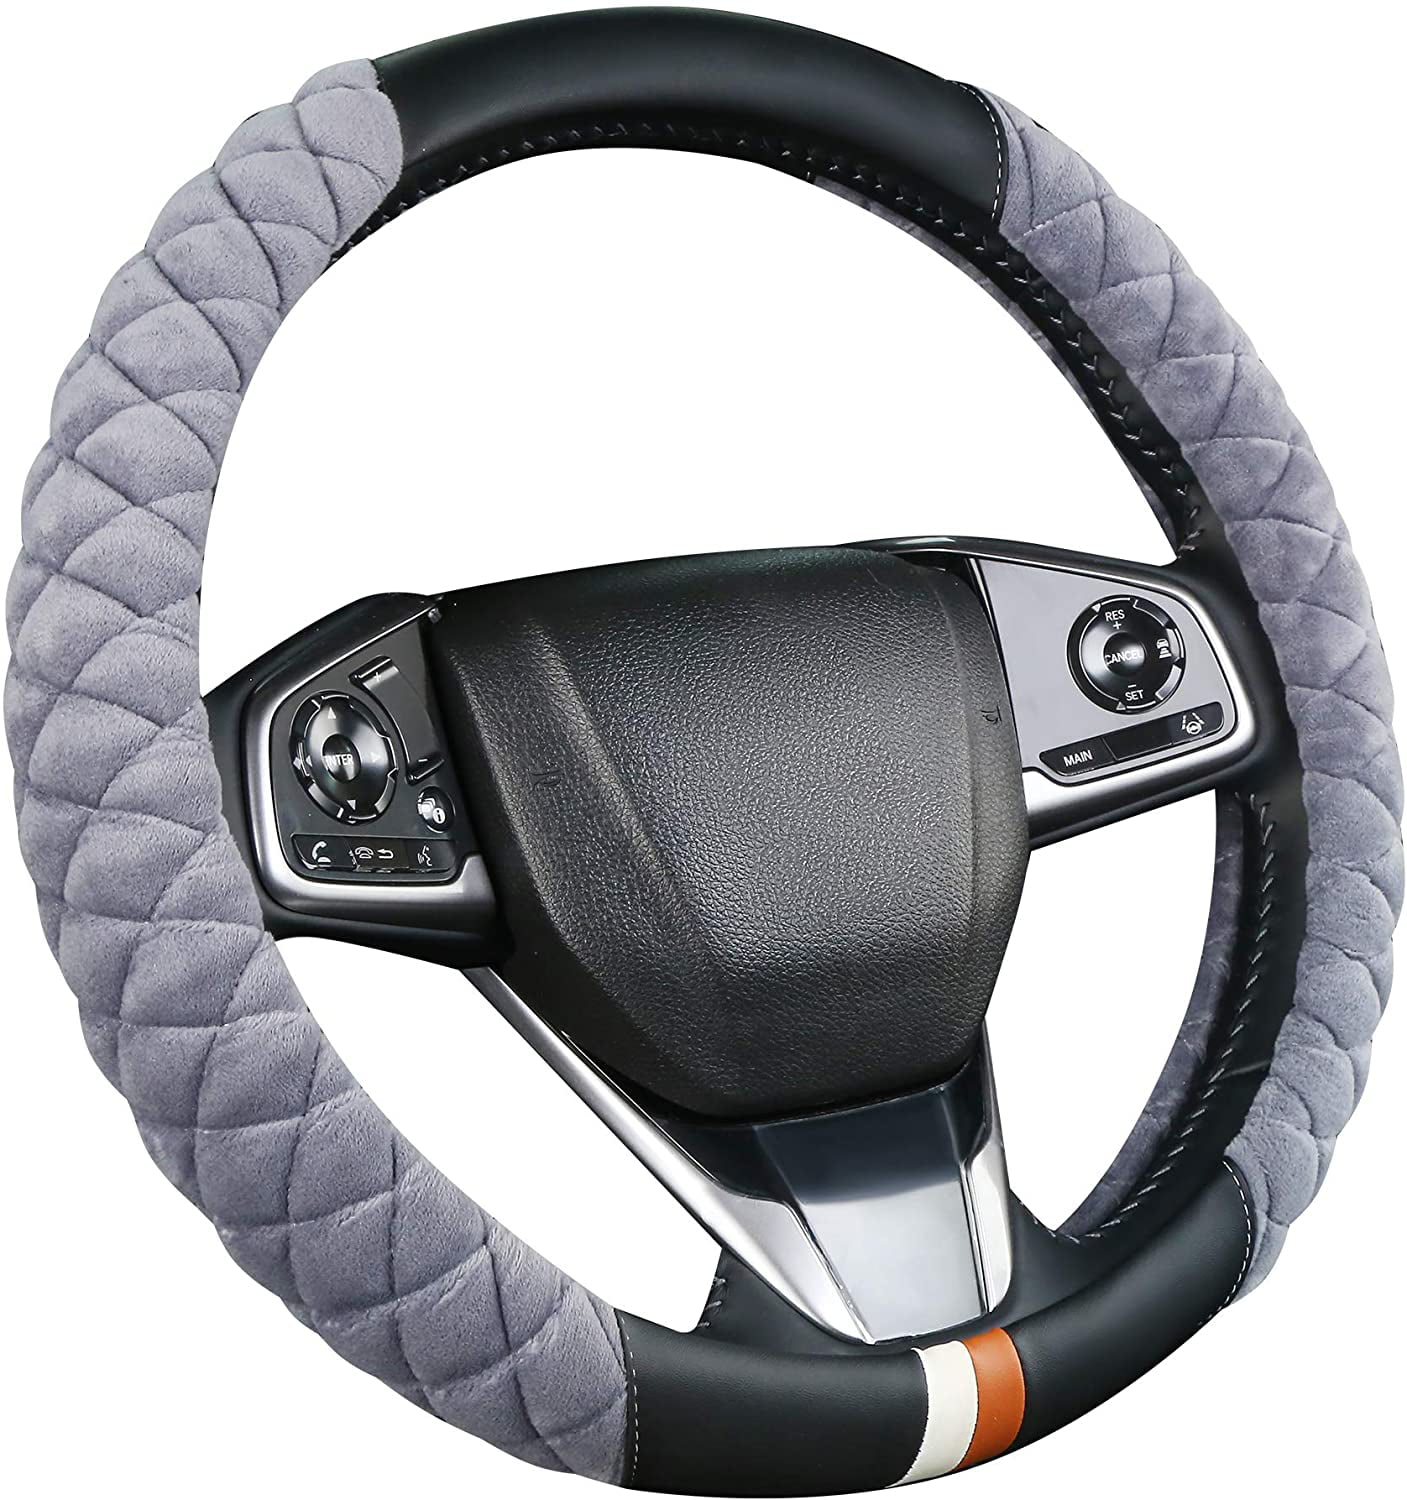 Universal 15 inch Crimson Leather Auto Car Steering Wheel Cover Leather for Men and Women Non-Slip Breathable Soft and Comfortable 